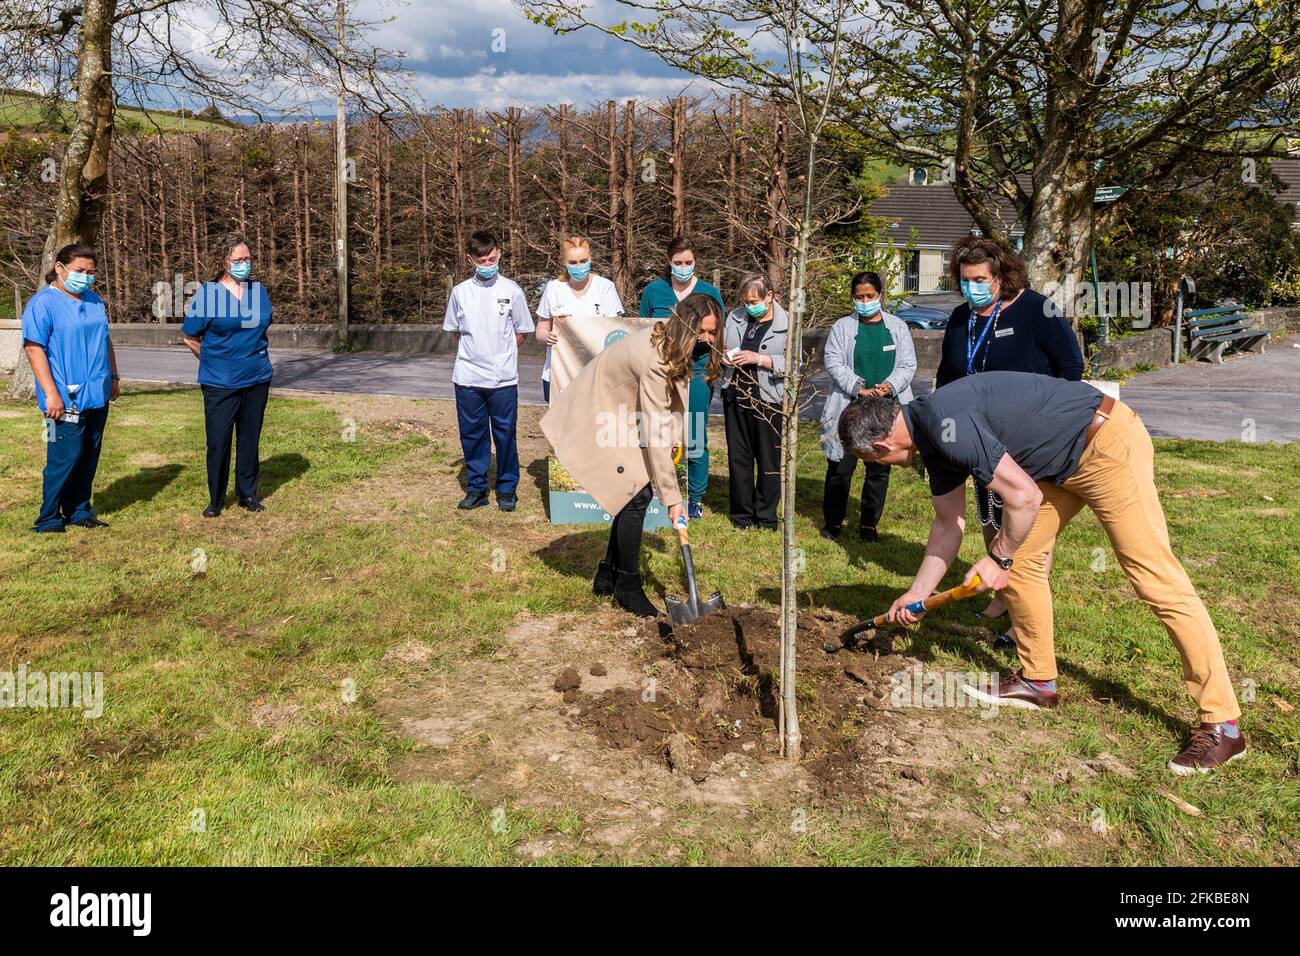 Bantry, West Cork, Ireland. 30th Apr, 2021. Holly Cairns TD planted a birch and oak tree at Bantry General Hospital today as part of the 'Nurse a Tree' initiative. Nurse a Tree plans to plant a tree for every healthcare worker in Ireland, which amounts to 80,000, as a living legacy. Assisting Holly with the planting of an oak tree is Maurice Ryan, Director of Green Belt LTD with Bantry Hospital Nurses watching on. Credit: AG News/Alamy Live News Stock Photo